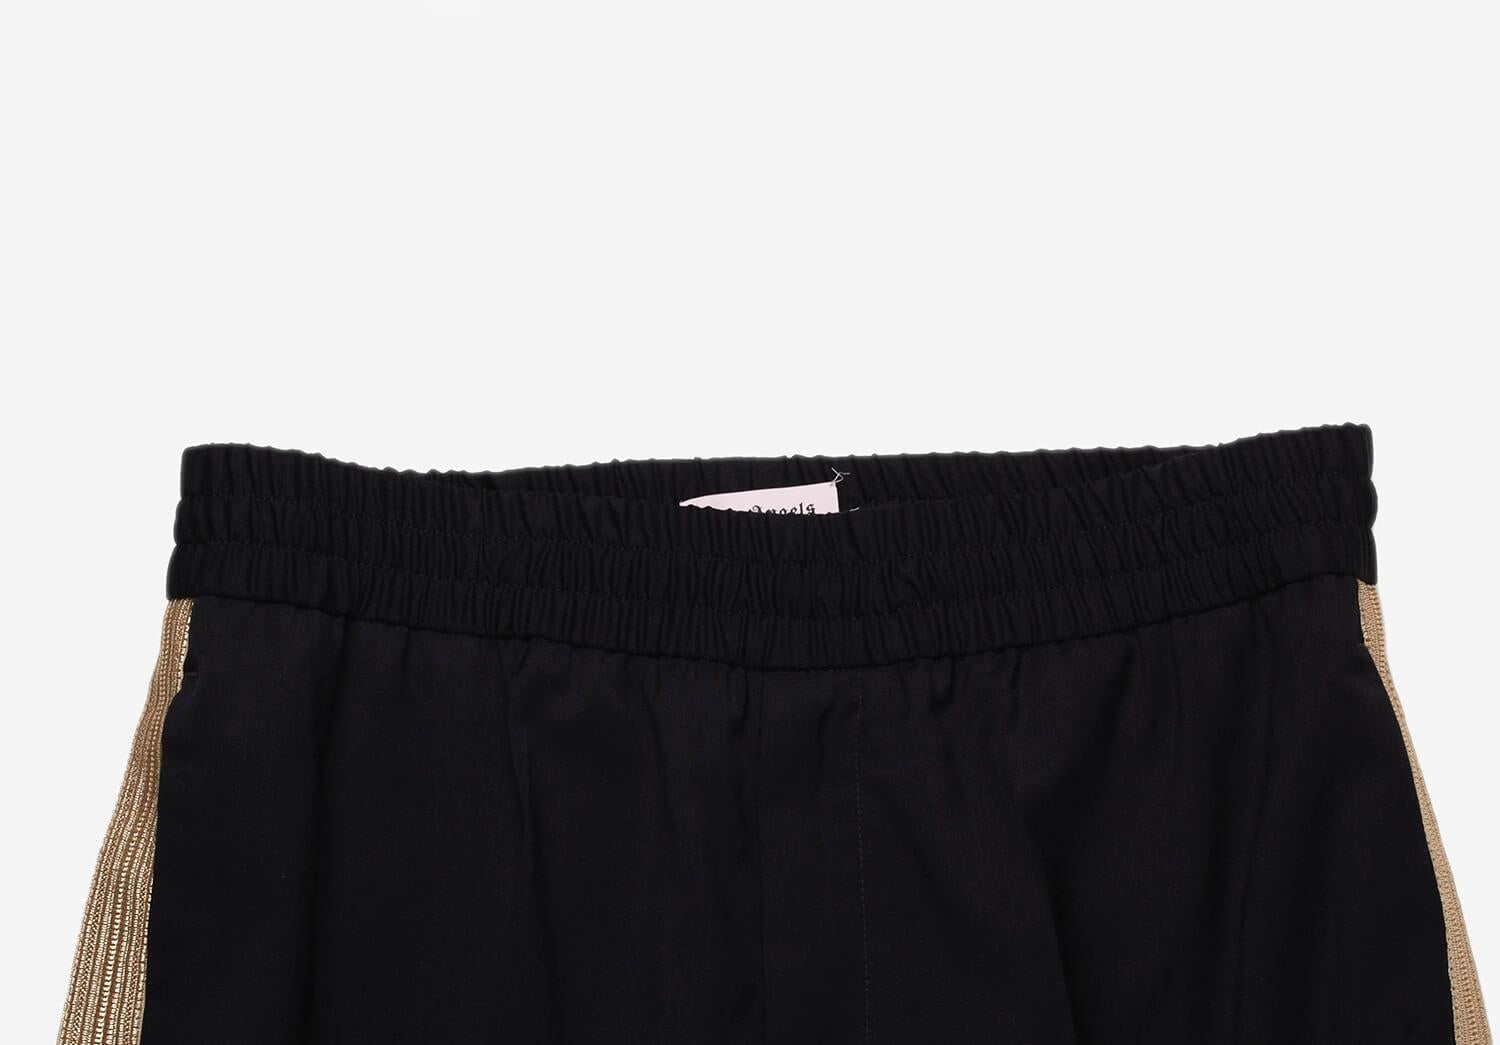 Item for sale is 100% genuine Palm Angels Pants
Color: Black
(An actual color may a bit vary due to individual computer screen interpretation)
Material: 100% virgin wool
Tag size: 52 (Large)
Thesepants are great quality item. Rate 9 of 10, excellent